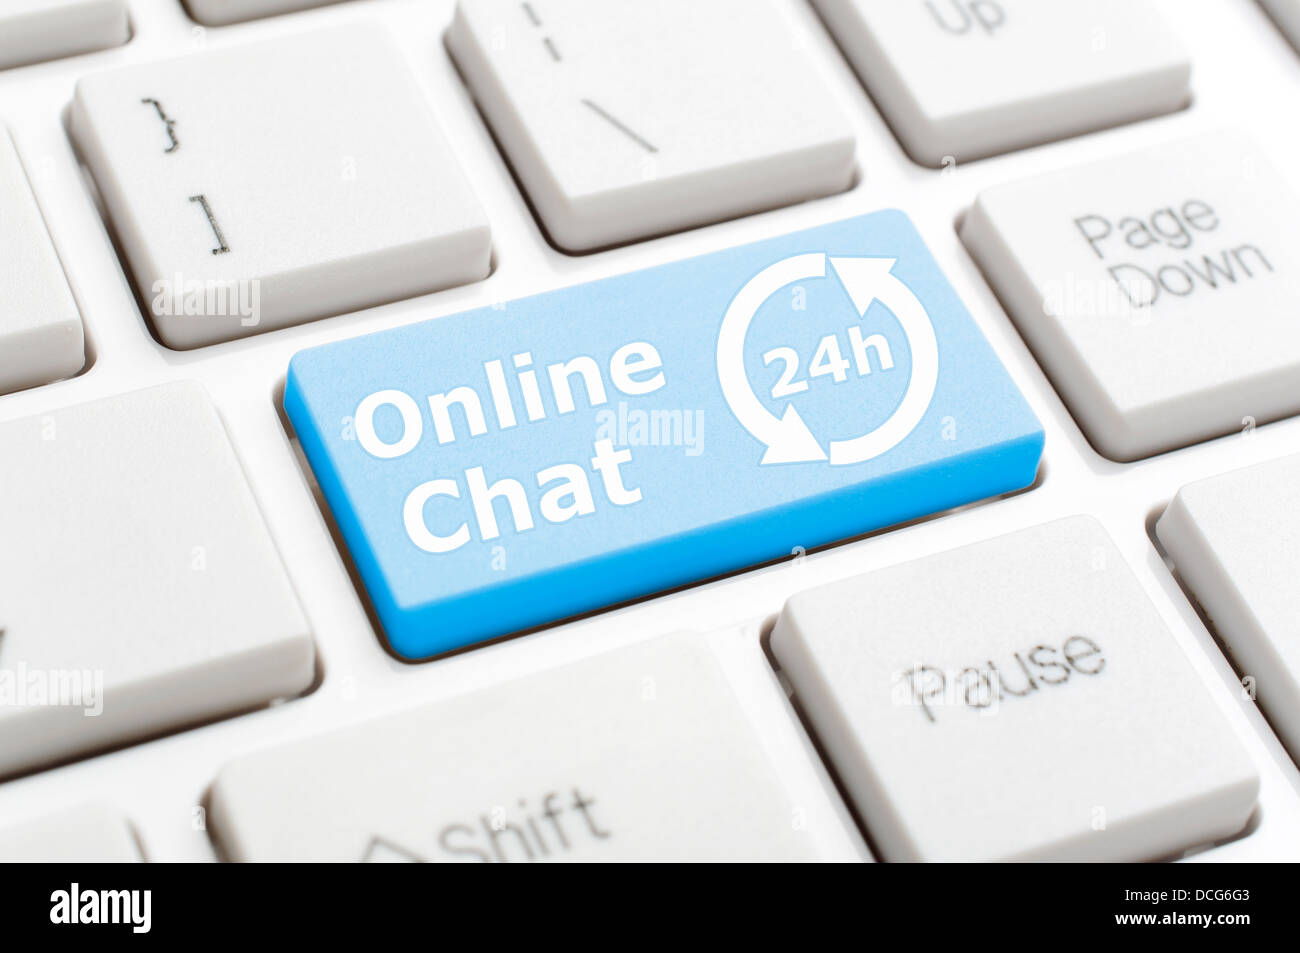 On-line chat on keyboard Stock Photo